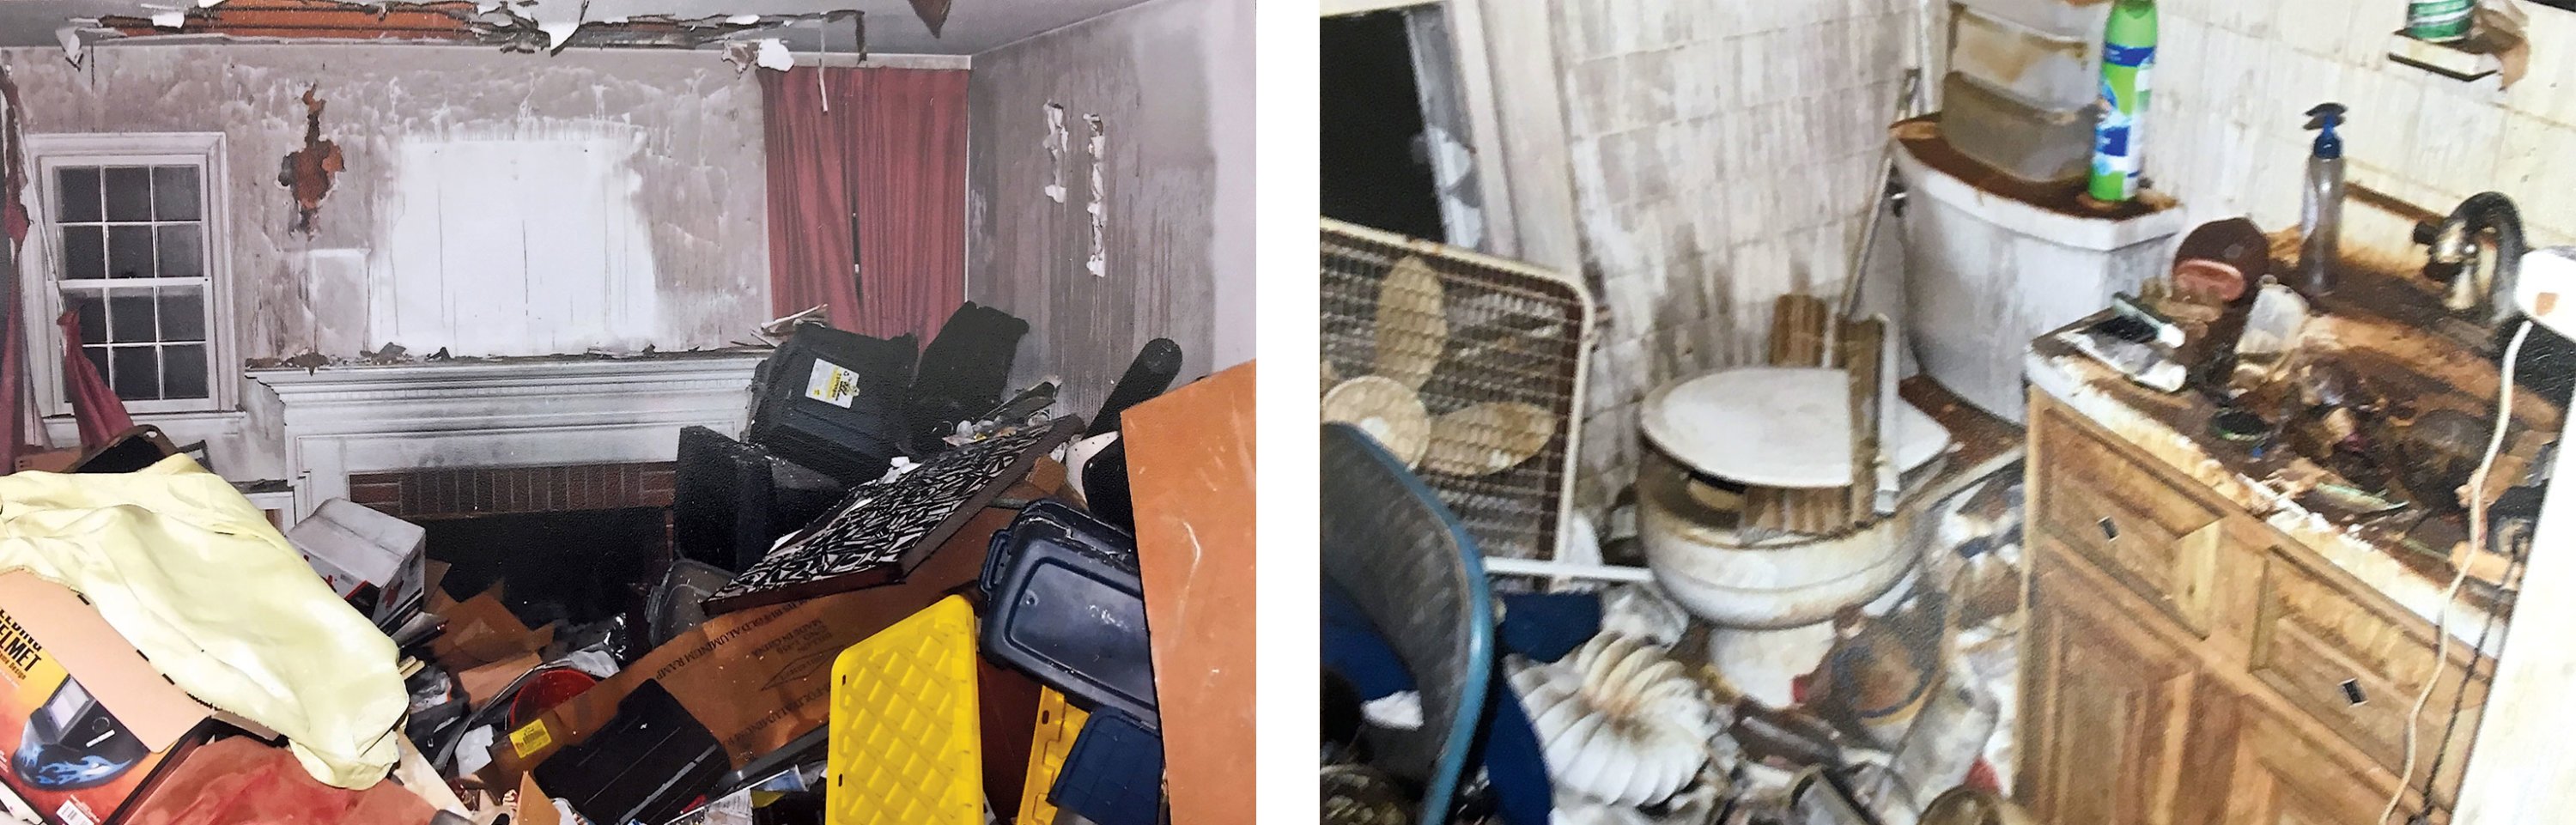 Investigators discovered hoarding conditions inside Daniel’s home. Photograph Courtesy of Montgomery County Circuit Court.